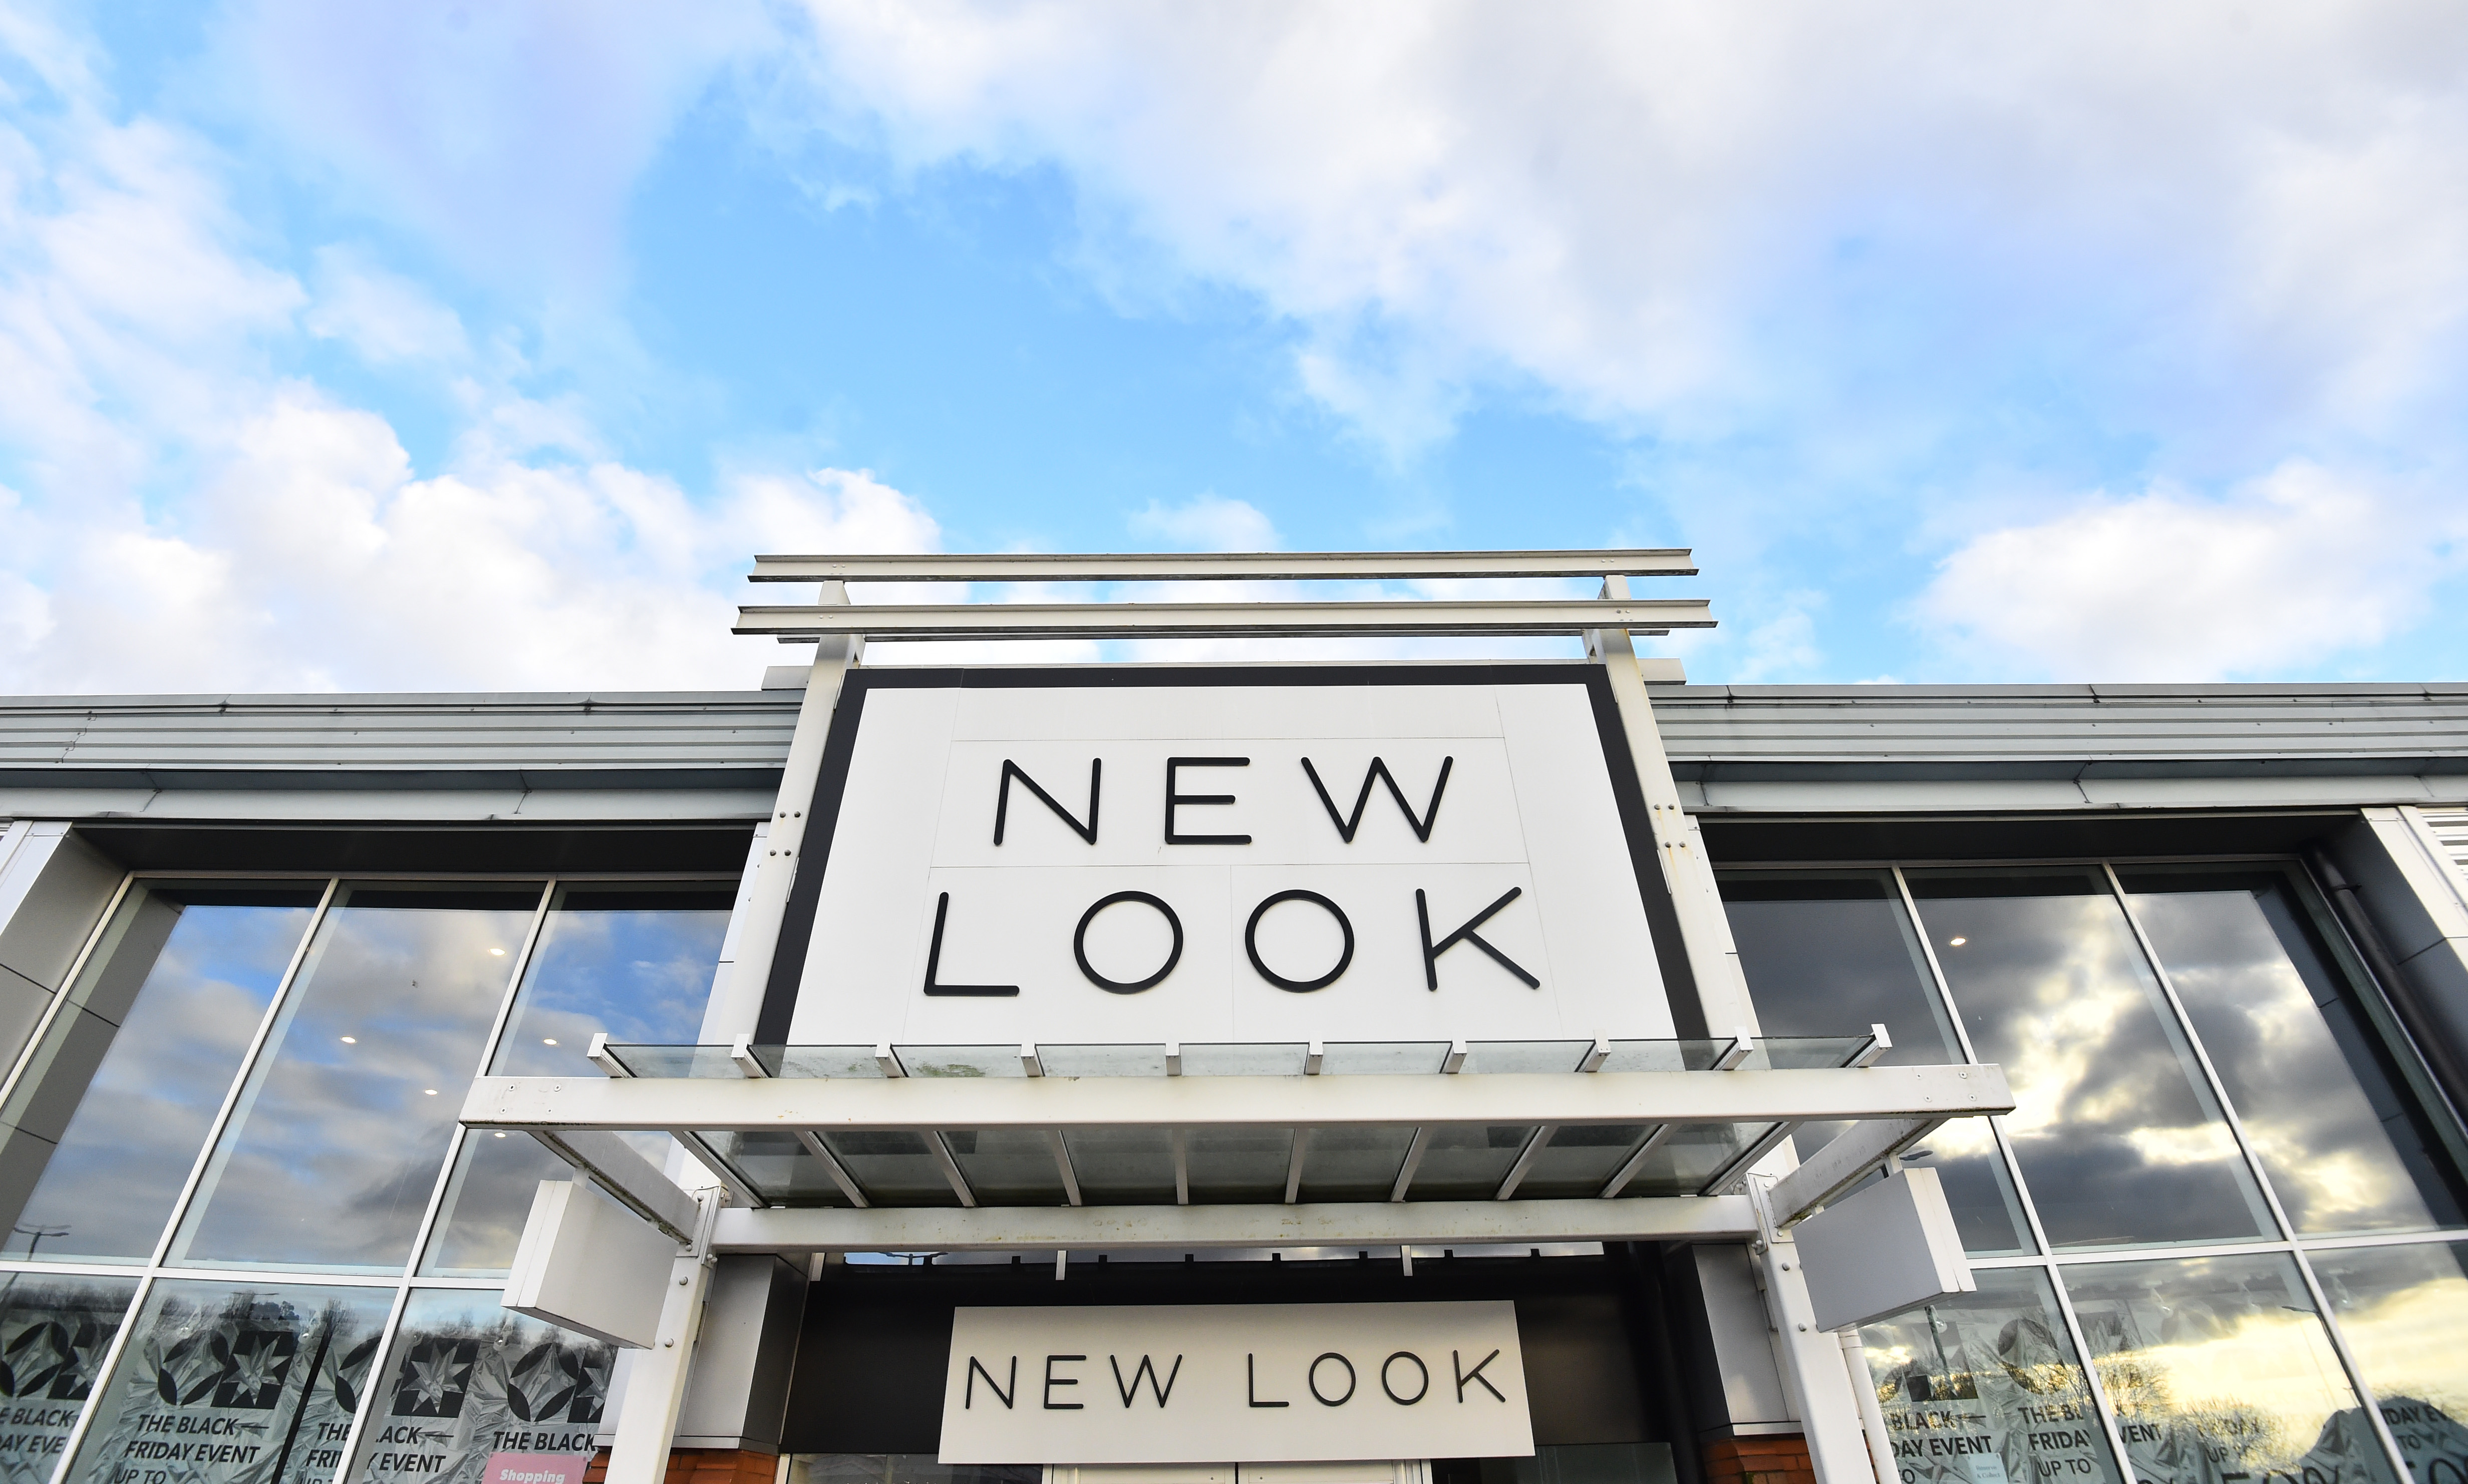 New Look has already closed a number of stores this year